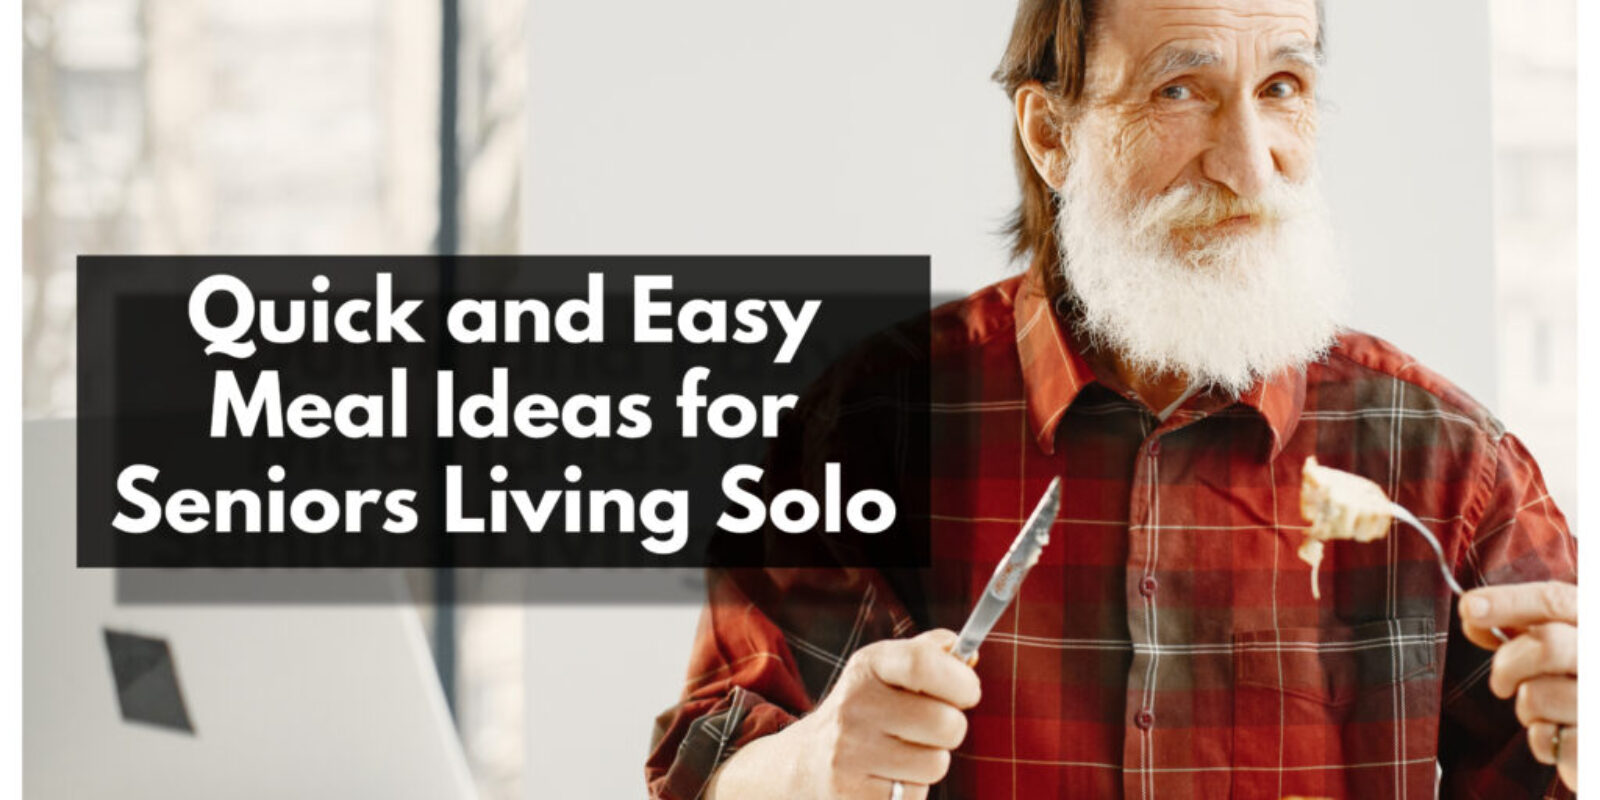 Quick and Easy Meal Ideas for Seniors Living Solo